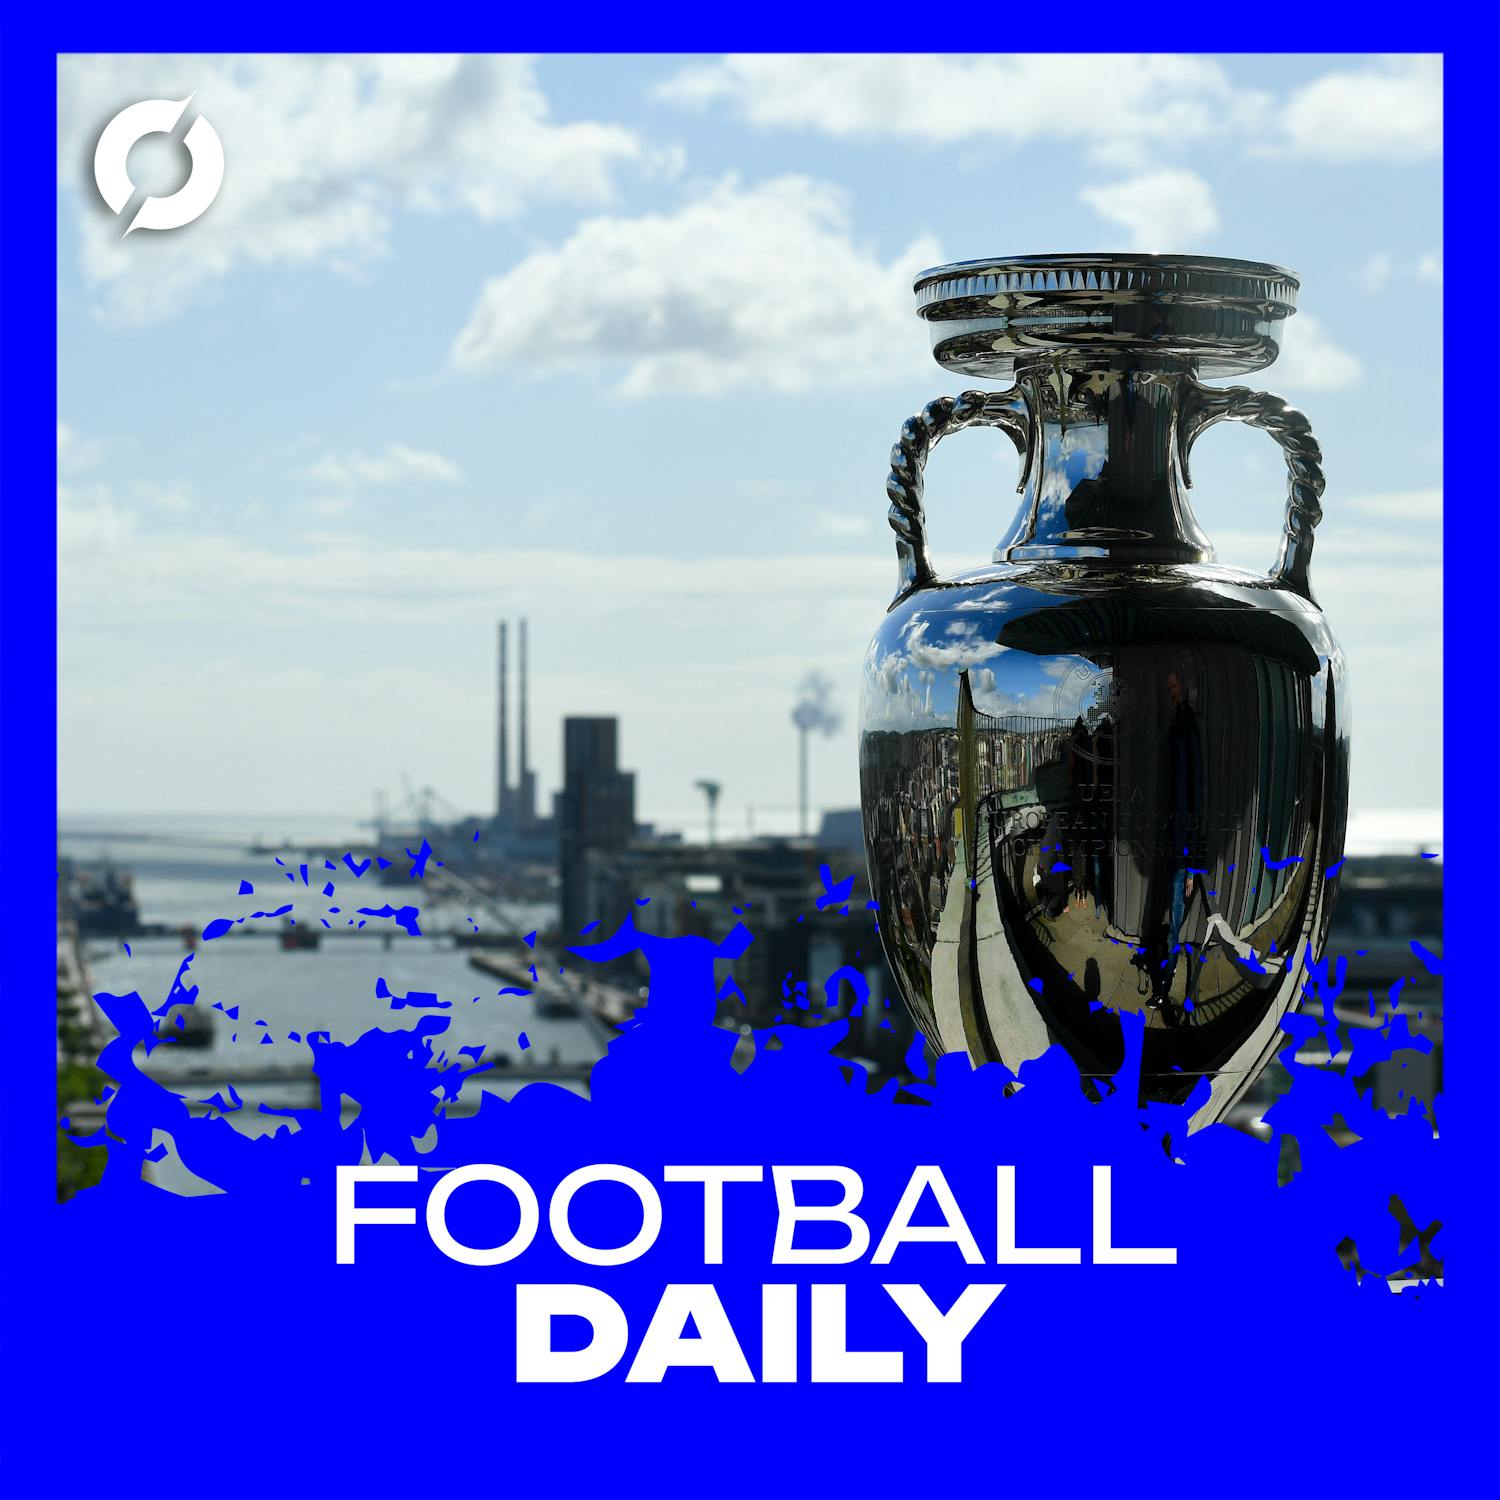 Football Daily: Ireland and UK confirmed as Euro 2028 co-hosts, Hazard retires from football, United v PSG in Women’s Champions League